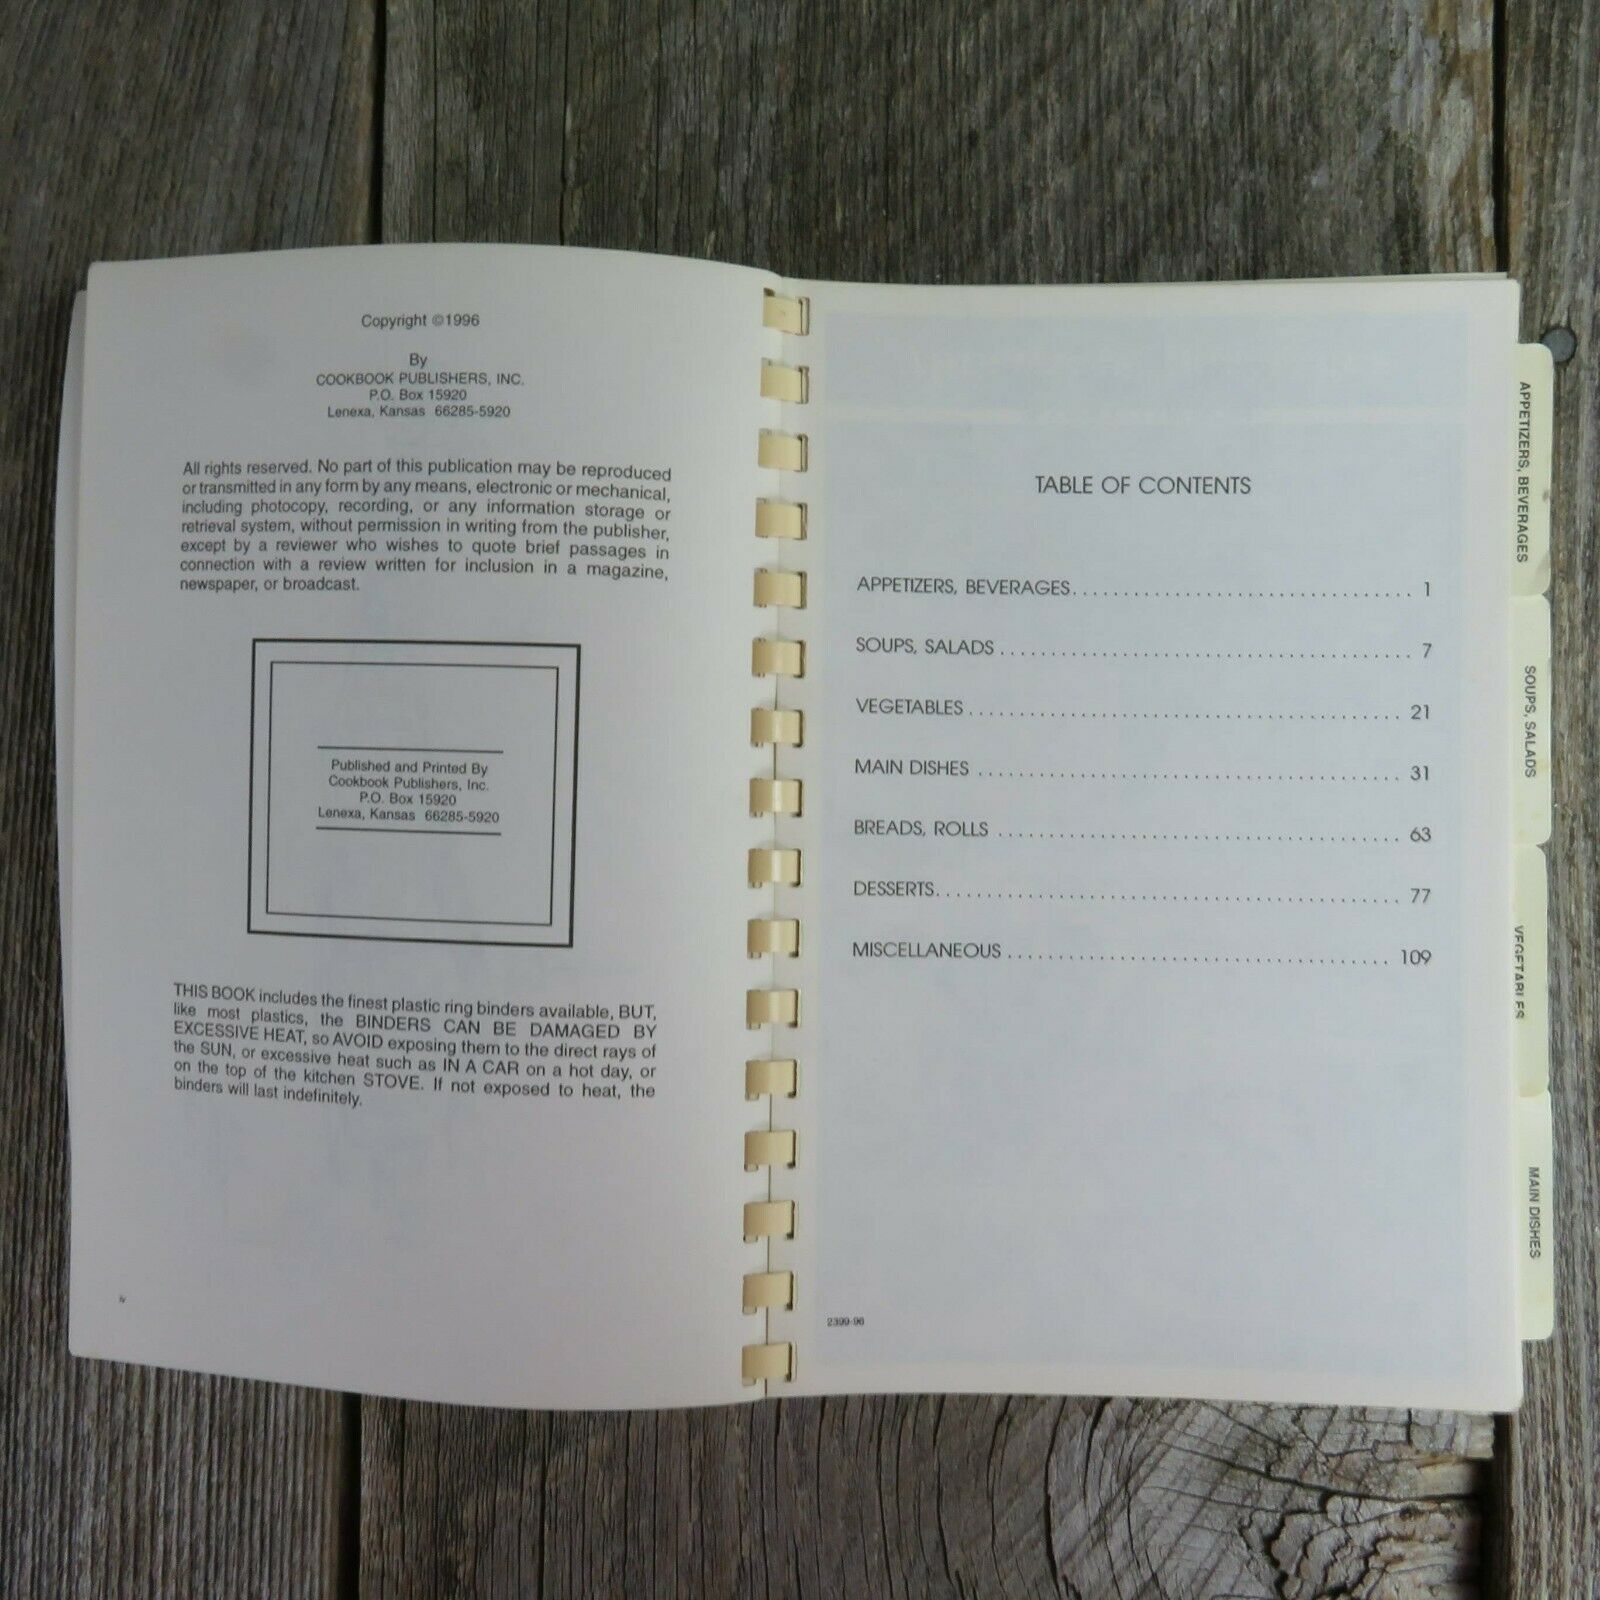 Vintage Missouri Cookbook Home Cookin' First Baptist Church of Delta 1996 - At Grandma's Table